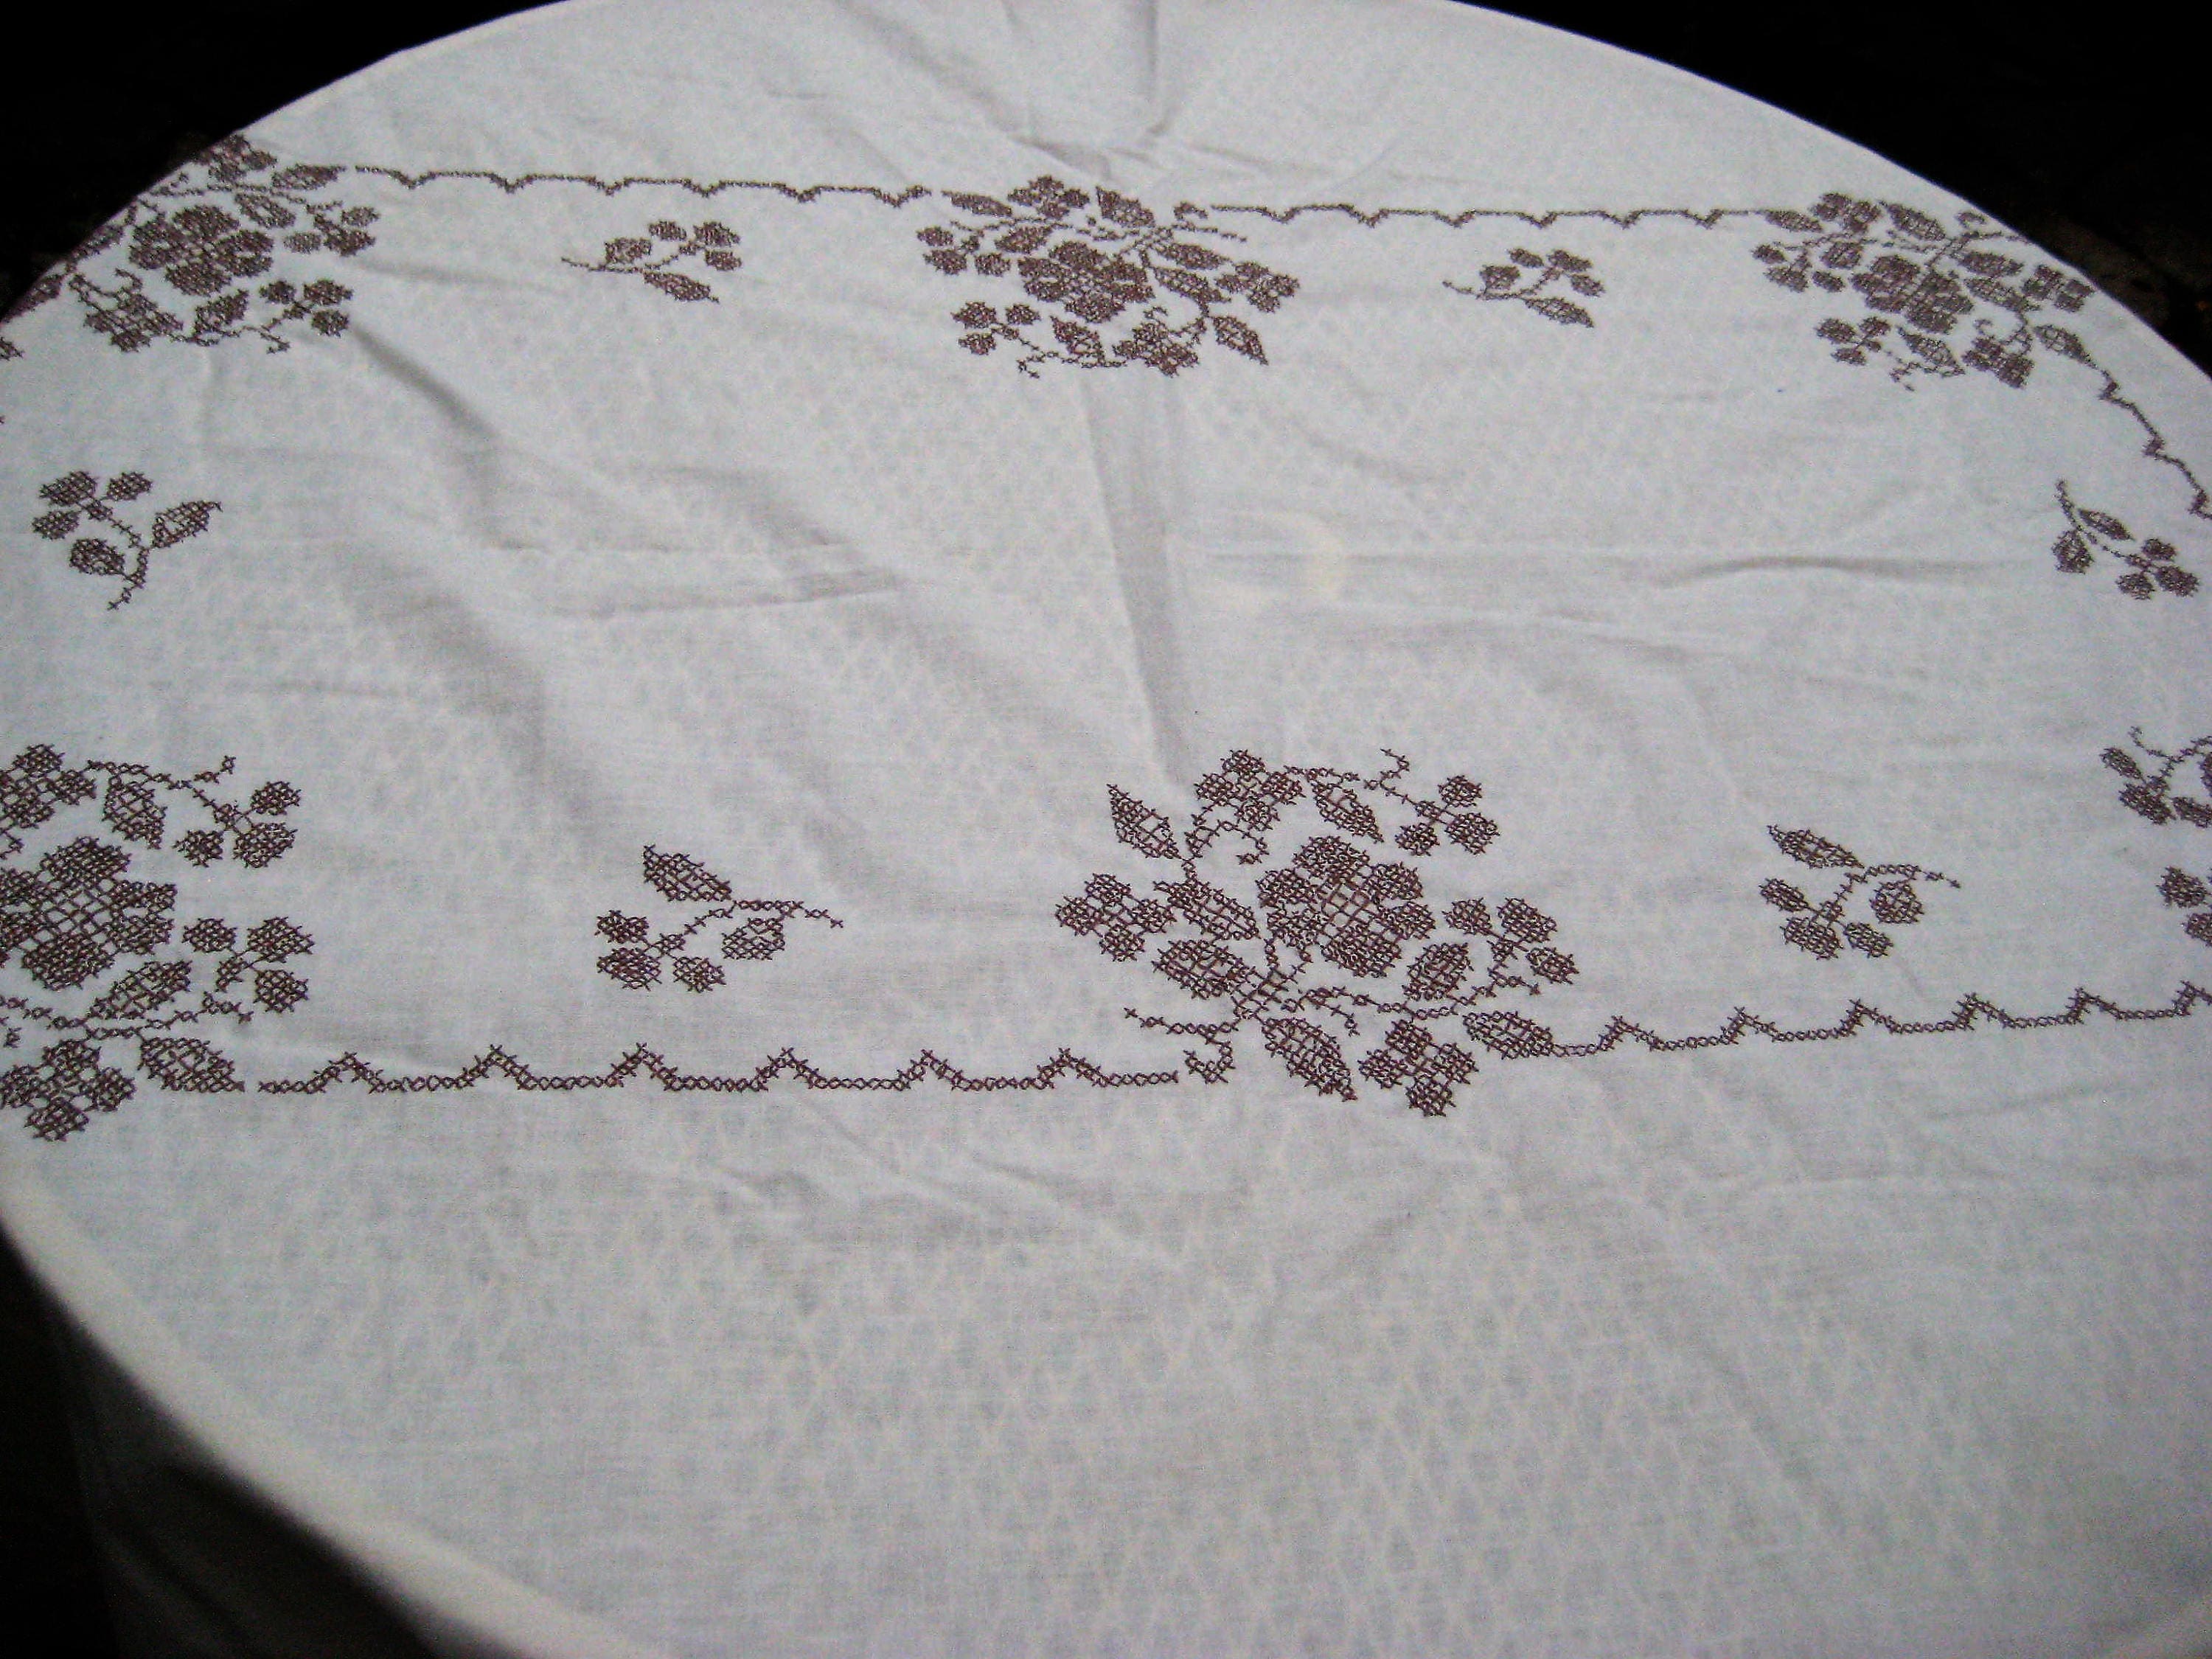 Cross Stitch Vintage Handmade Tablecloth Floral Hand Embroidered Table Top Rectangle Soft Beige Cotton